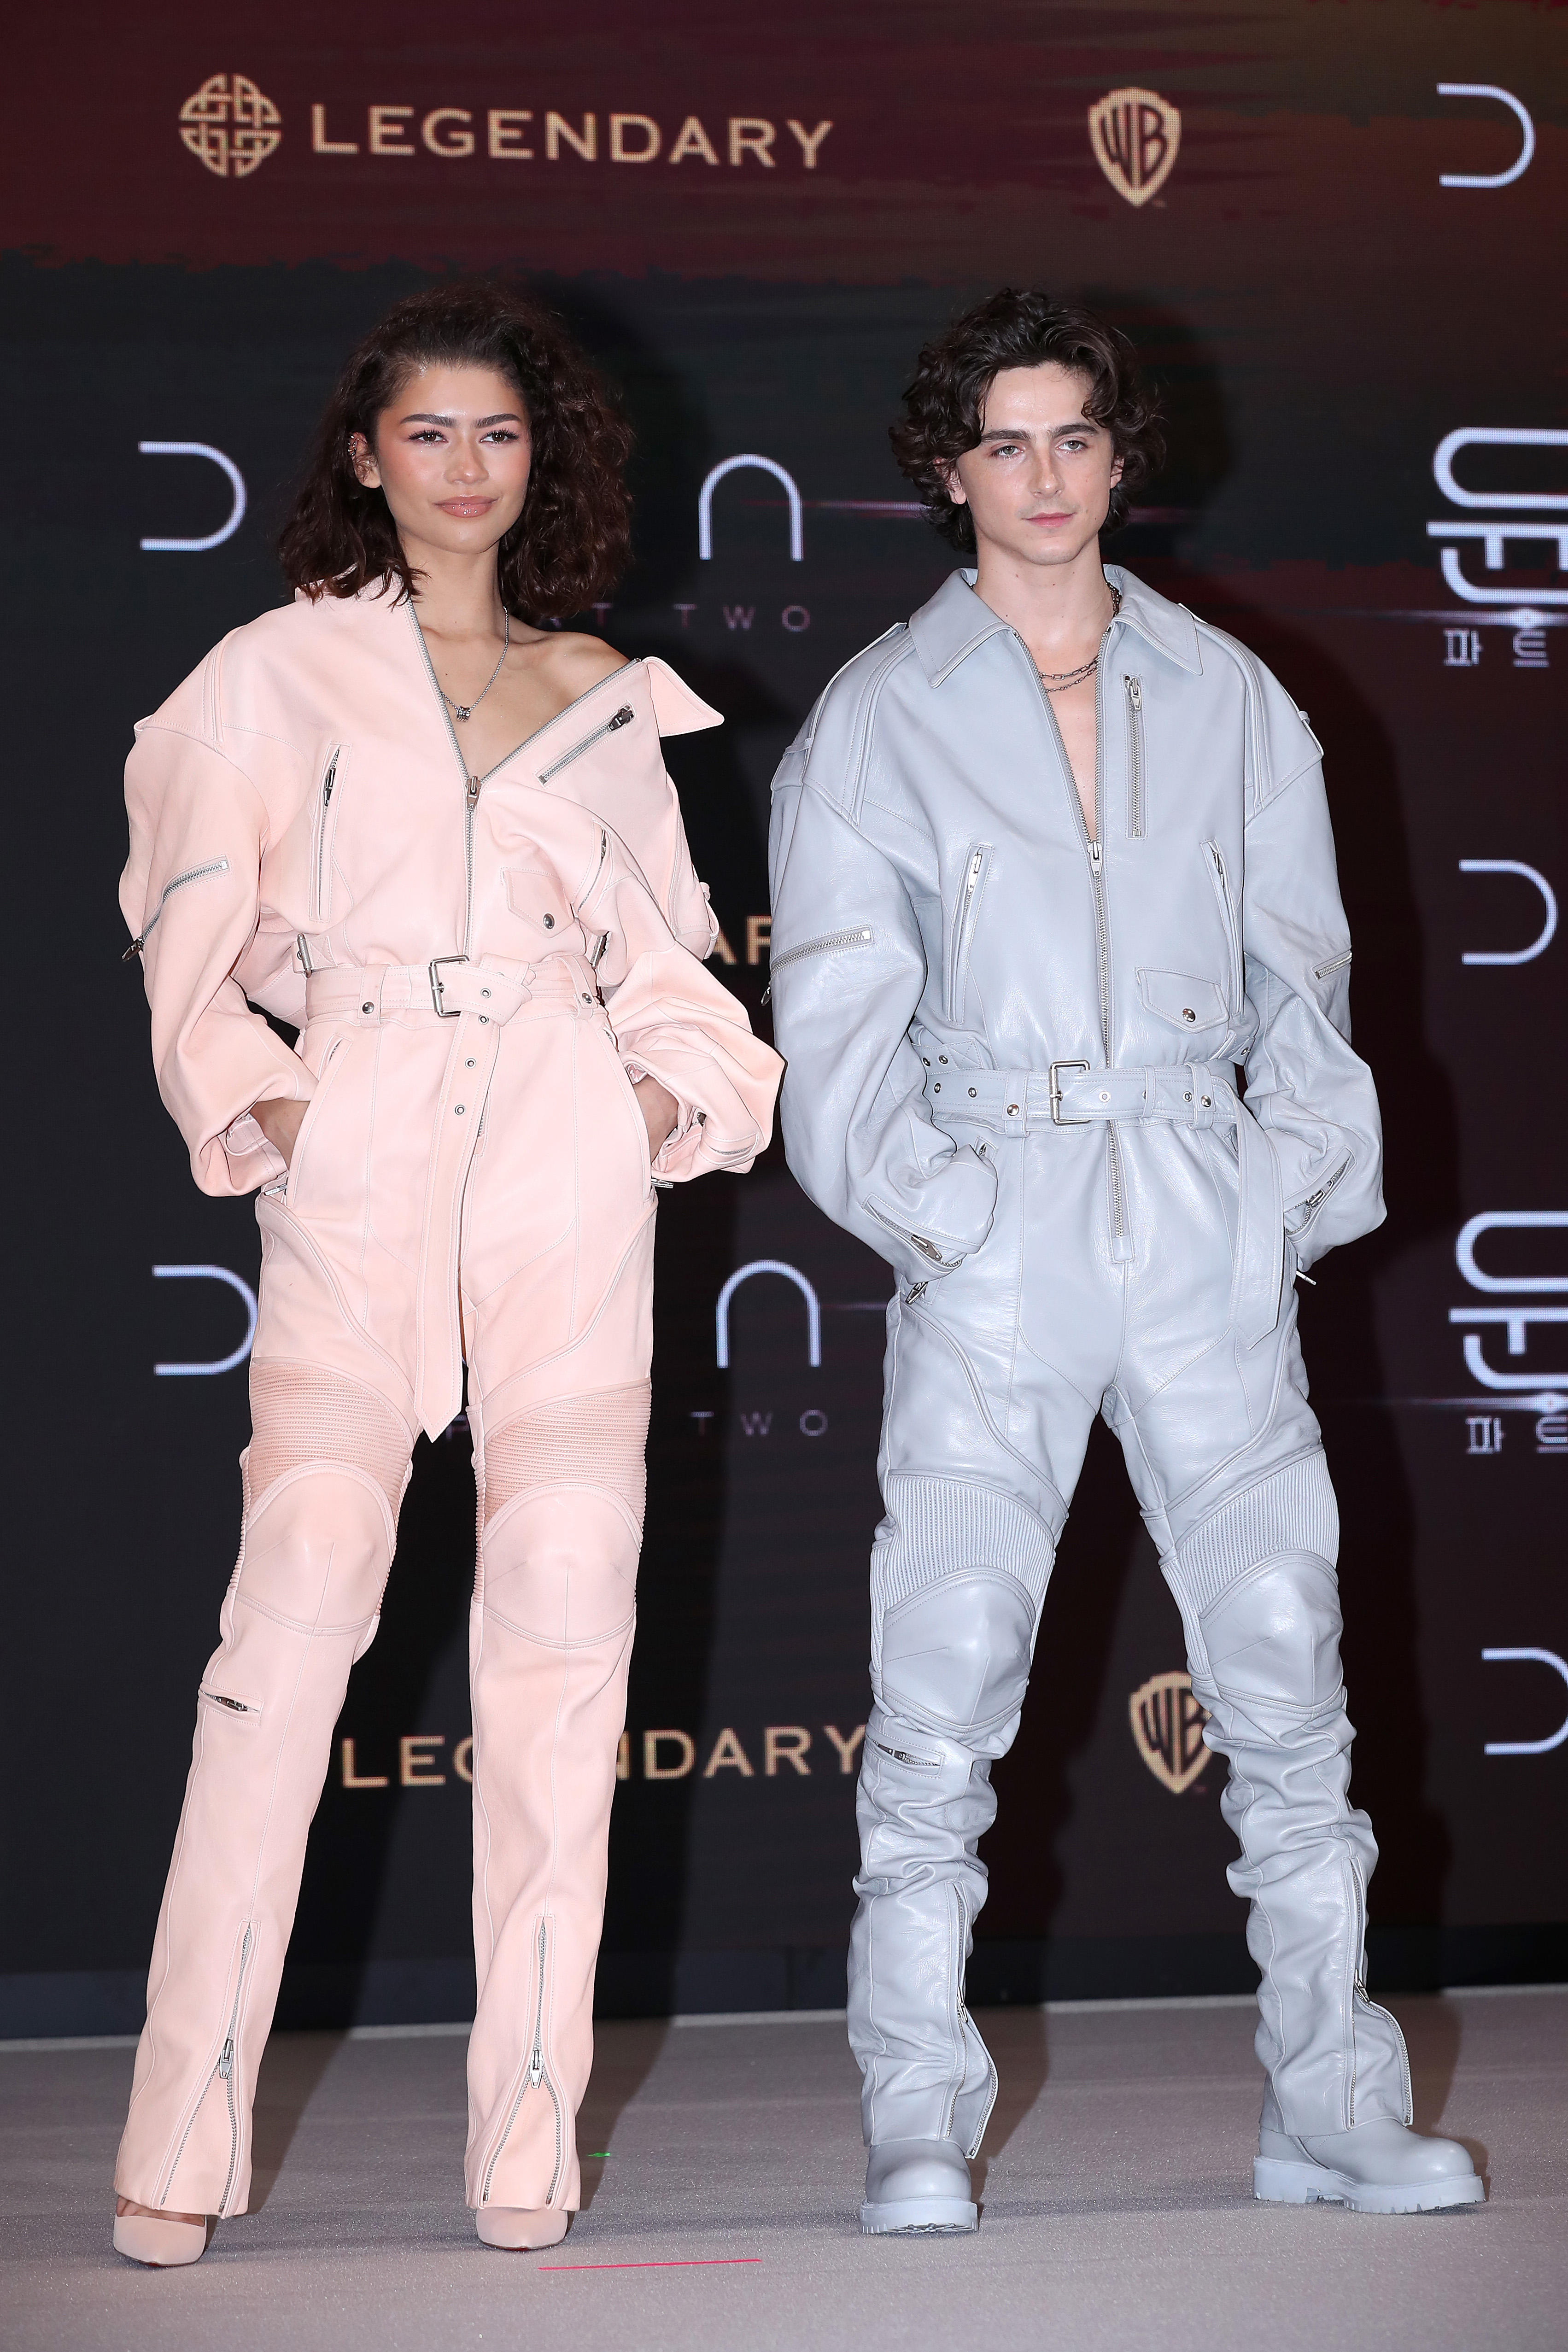 Zendaya and Timmy posing, she in a pink jumpsuit and he in a gray outfit with boots, at an event